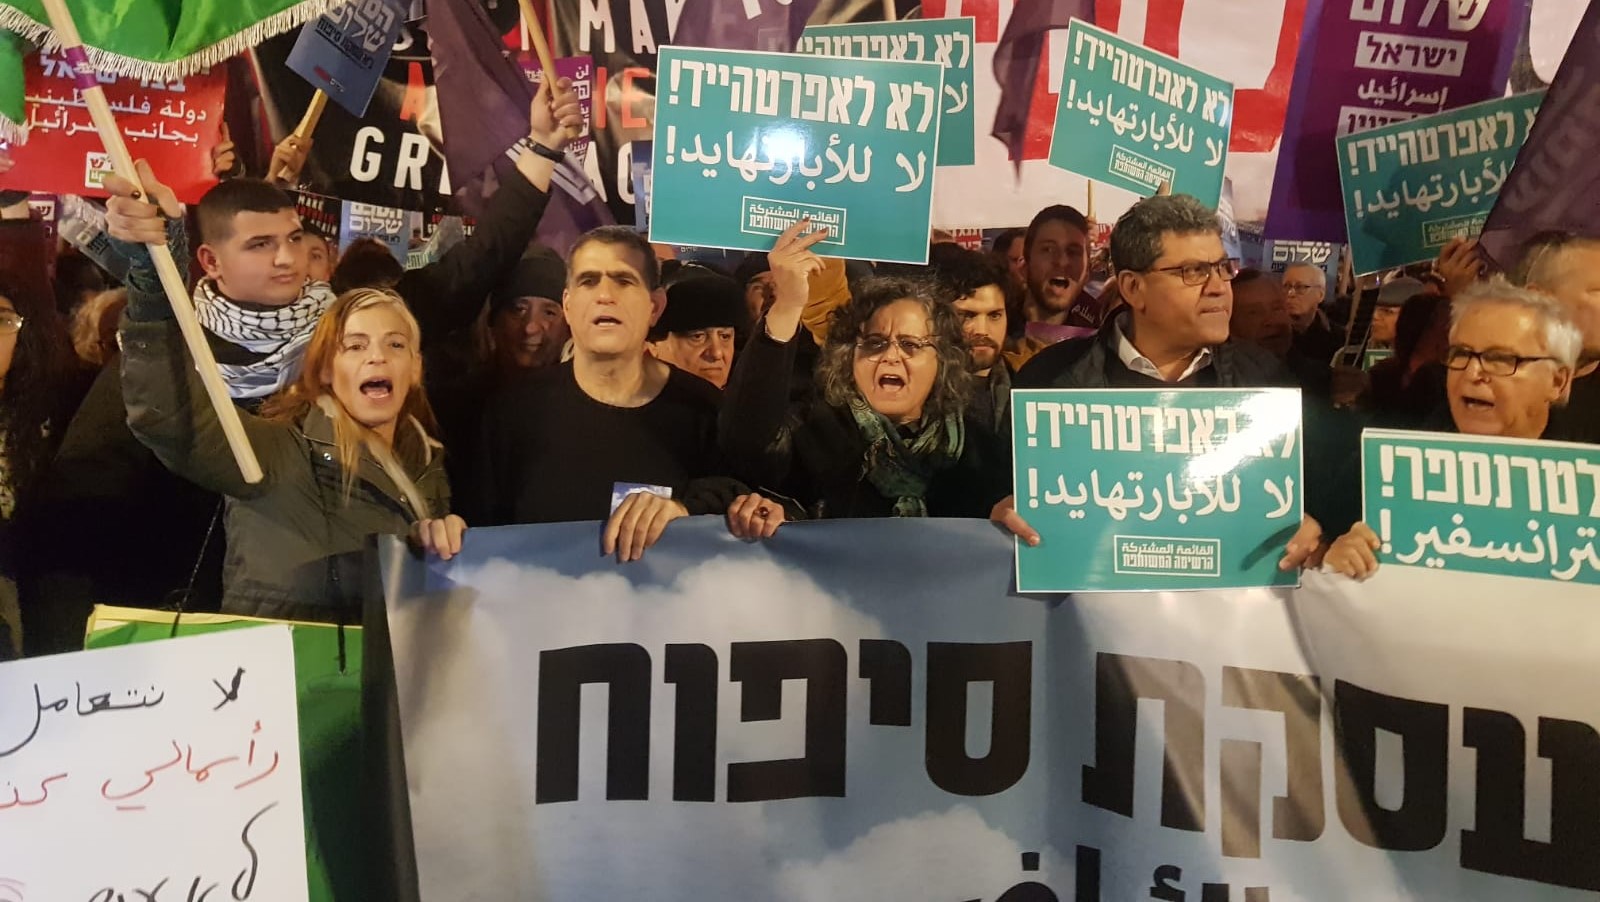 Demonstrators in Tel Aviv march against US President Donald Trump's "Deal of the Century," last night, Saturday, February 1, in Central Tel Aviv. Banners condemn the "Annexation Deal" and declare "No to Apartheid." Second from right, Communist Party of Israel Secretary General, Adel Amer; third from right Hadash MK Aida Touma-Sliman (Joint List).